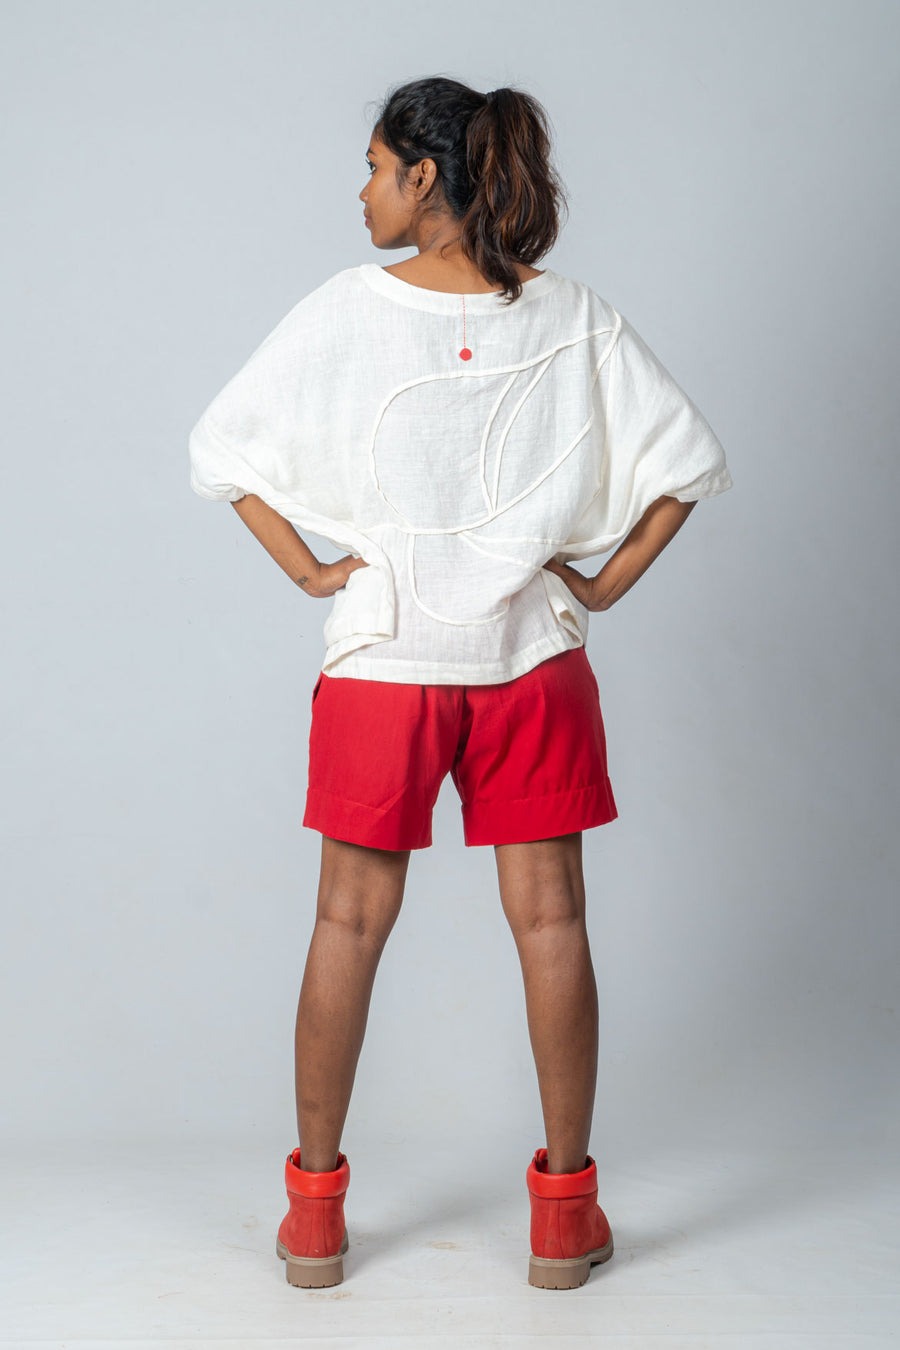 Off White Khadi Top with Red Shorts- SUSAN LIMA SET